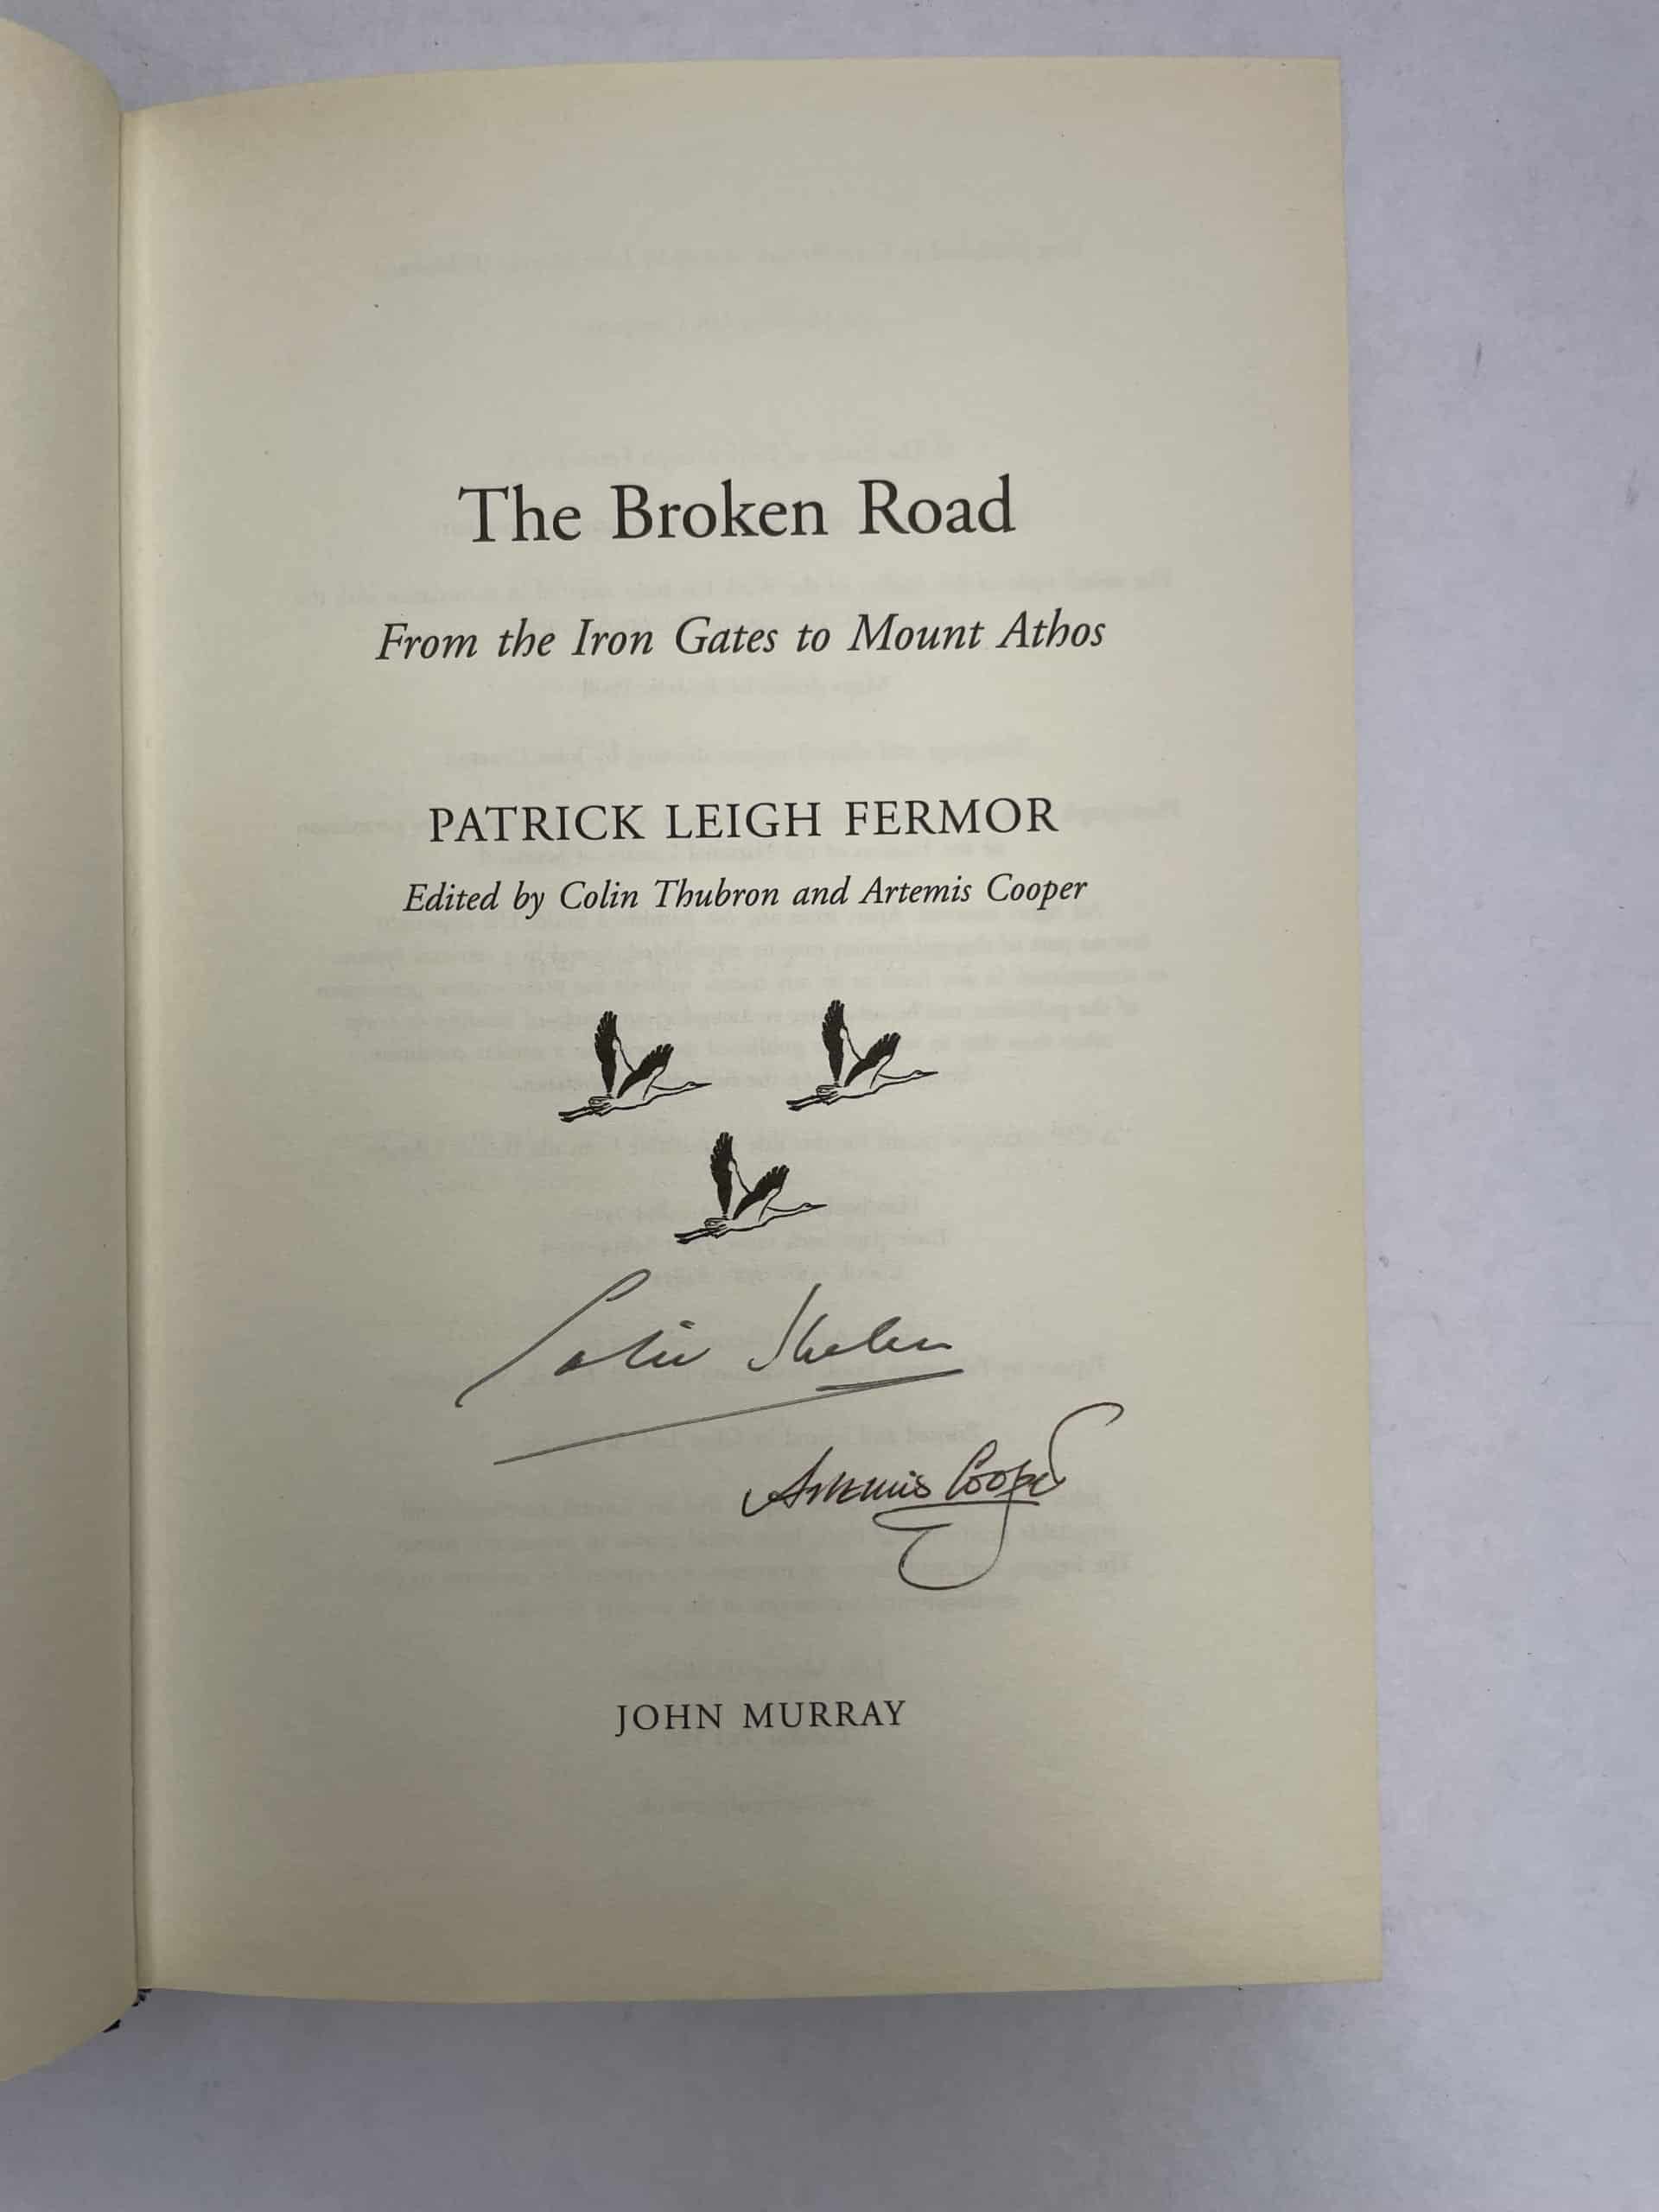 patrick leigh fermor signed trilogy6